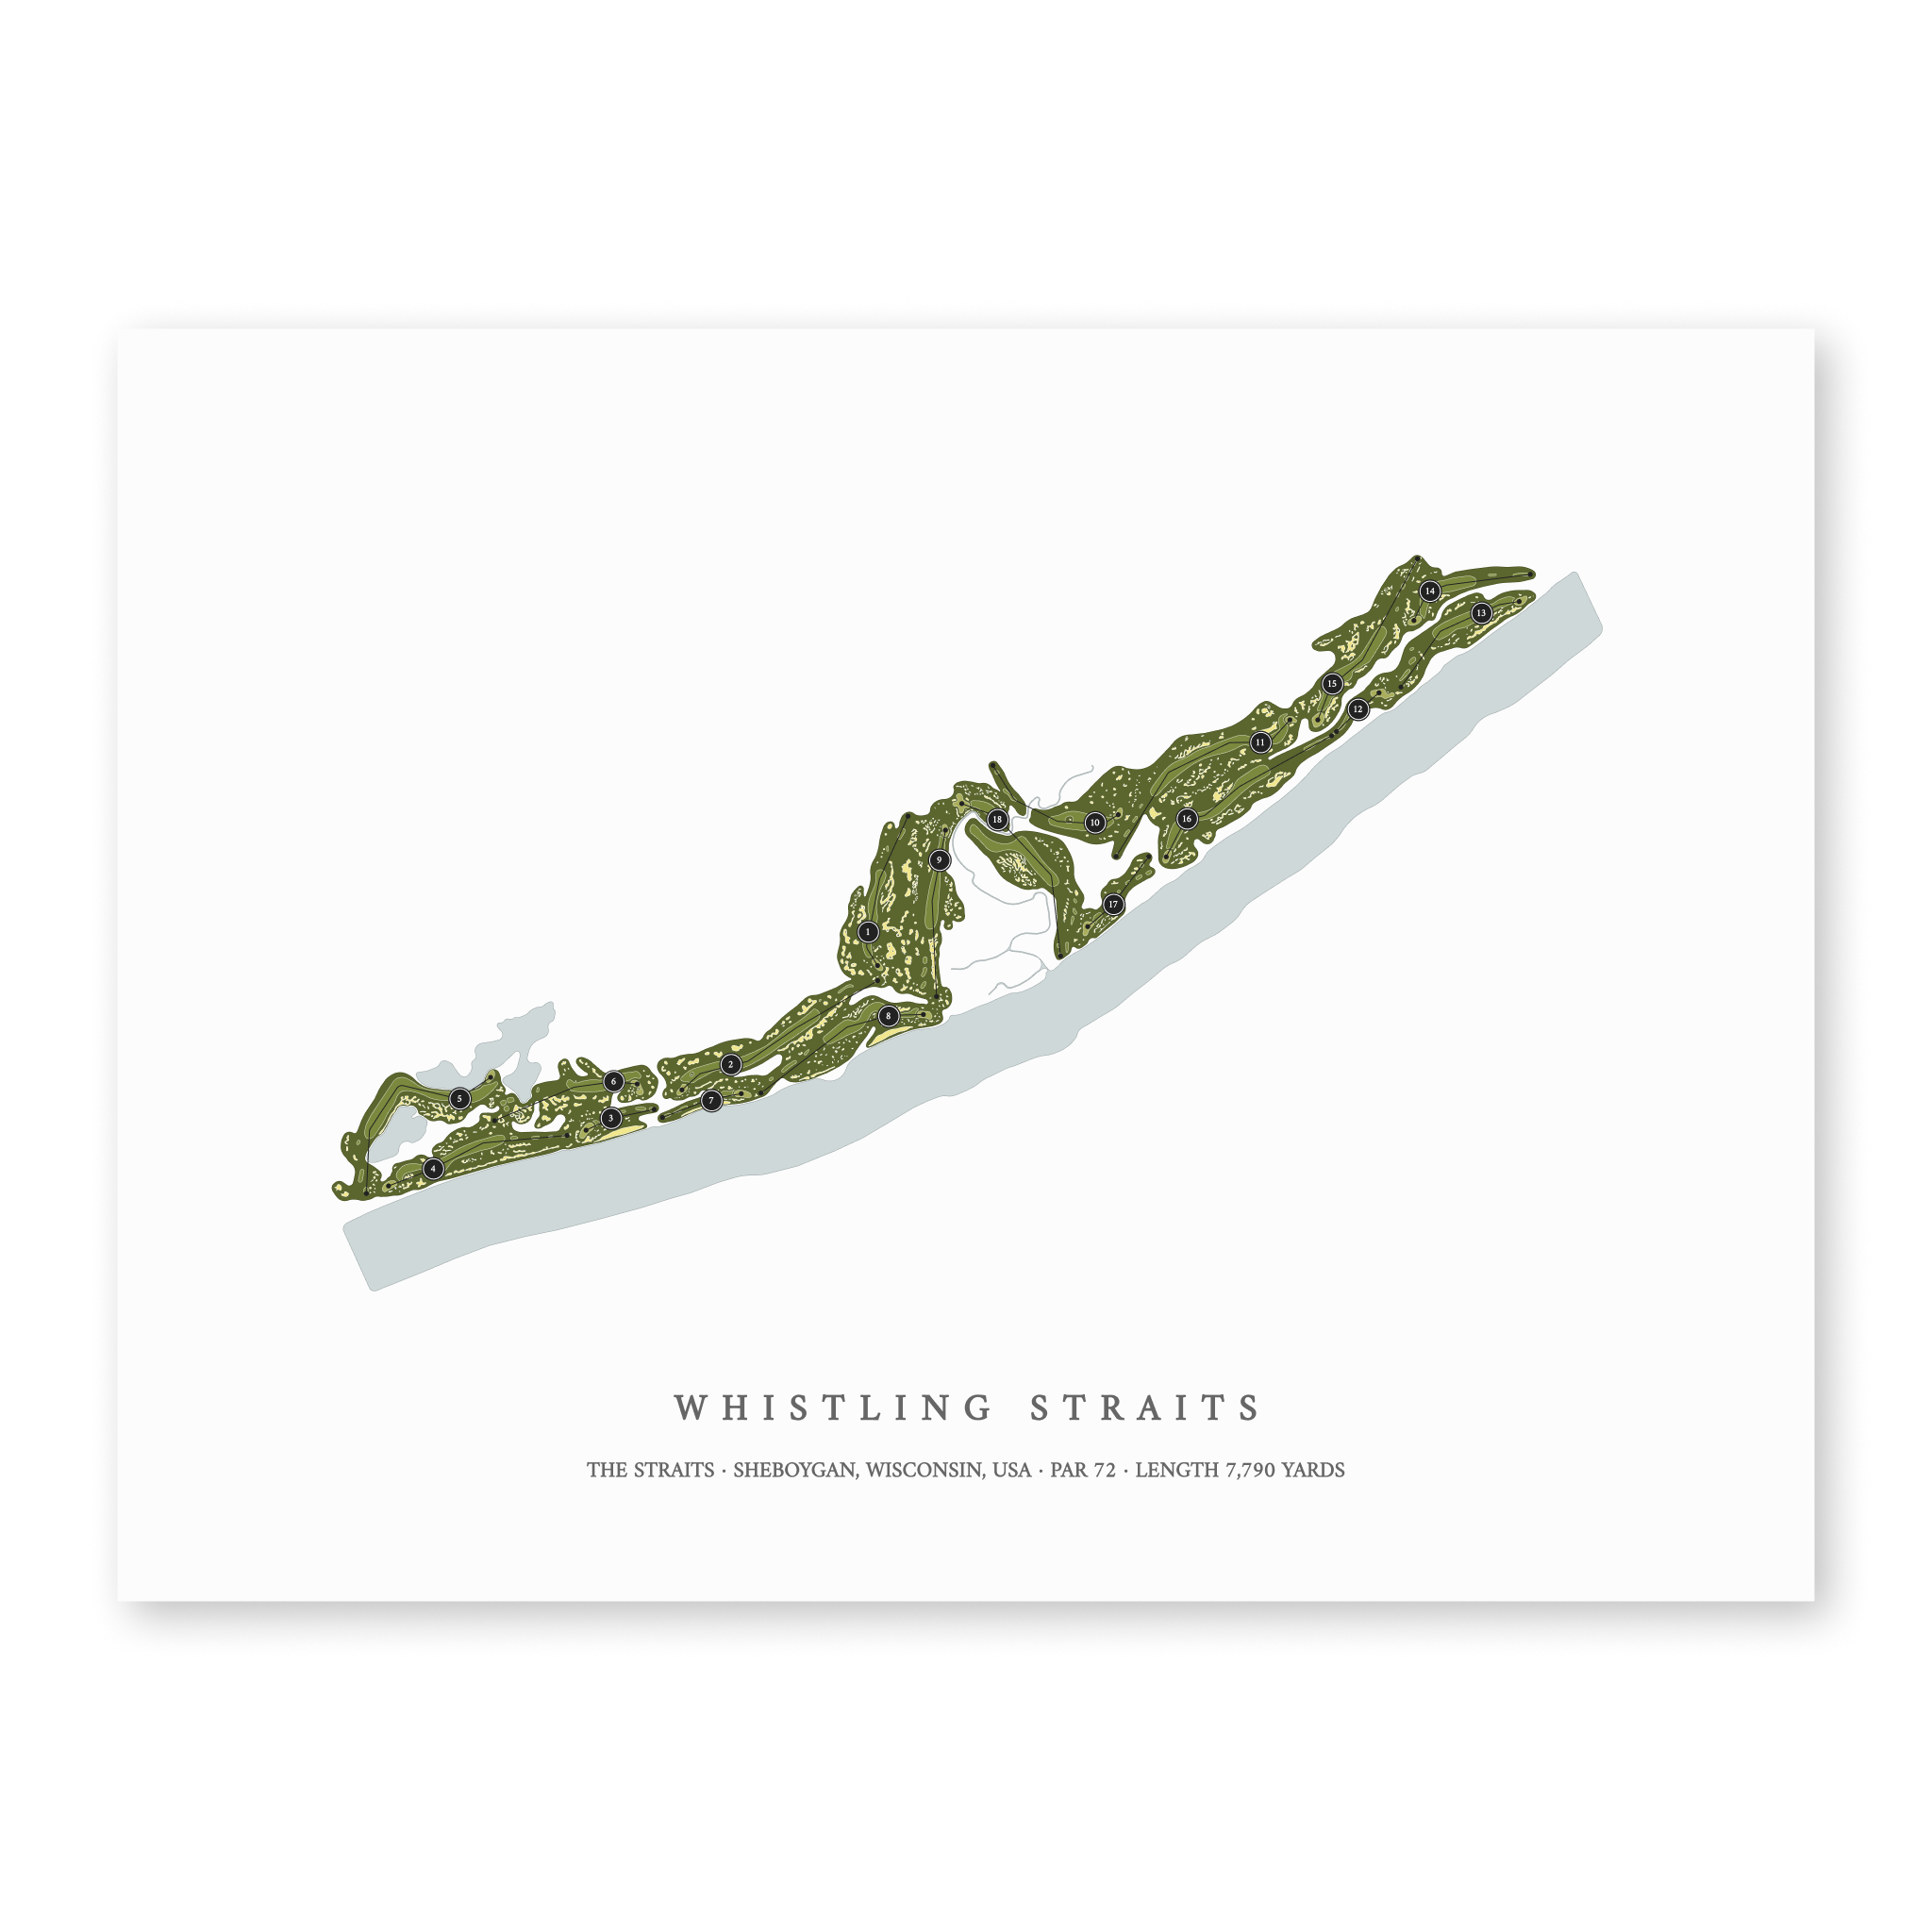 Whistling Straits - The Straits| Golf Course Print | Unframed With Hole Numbers #hole numbers_yes